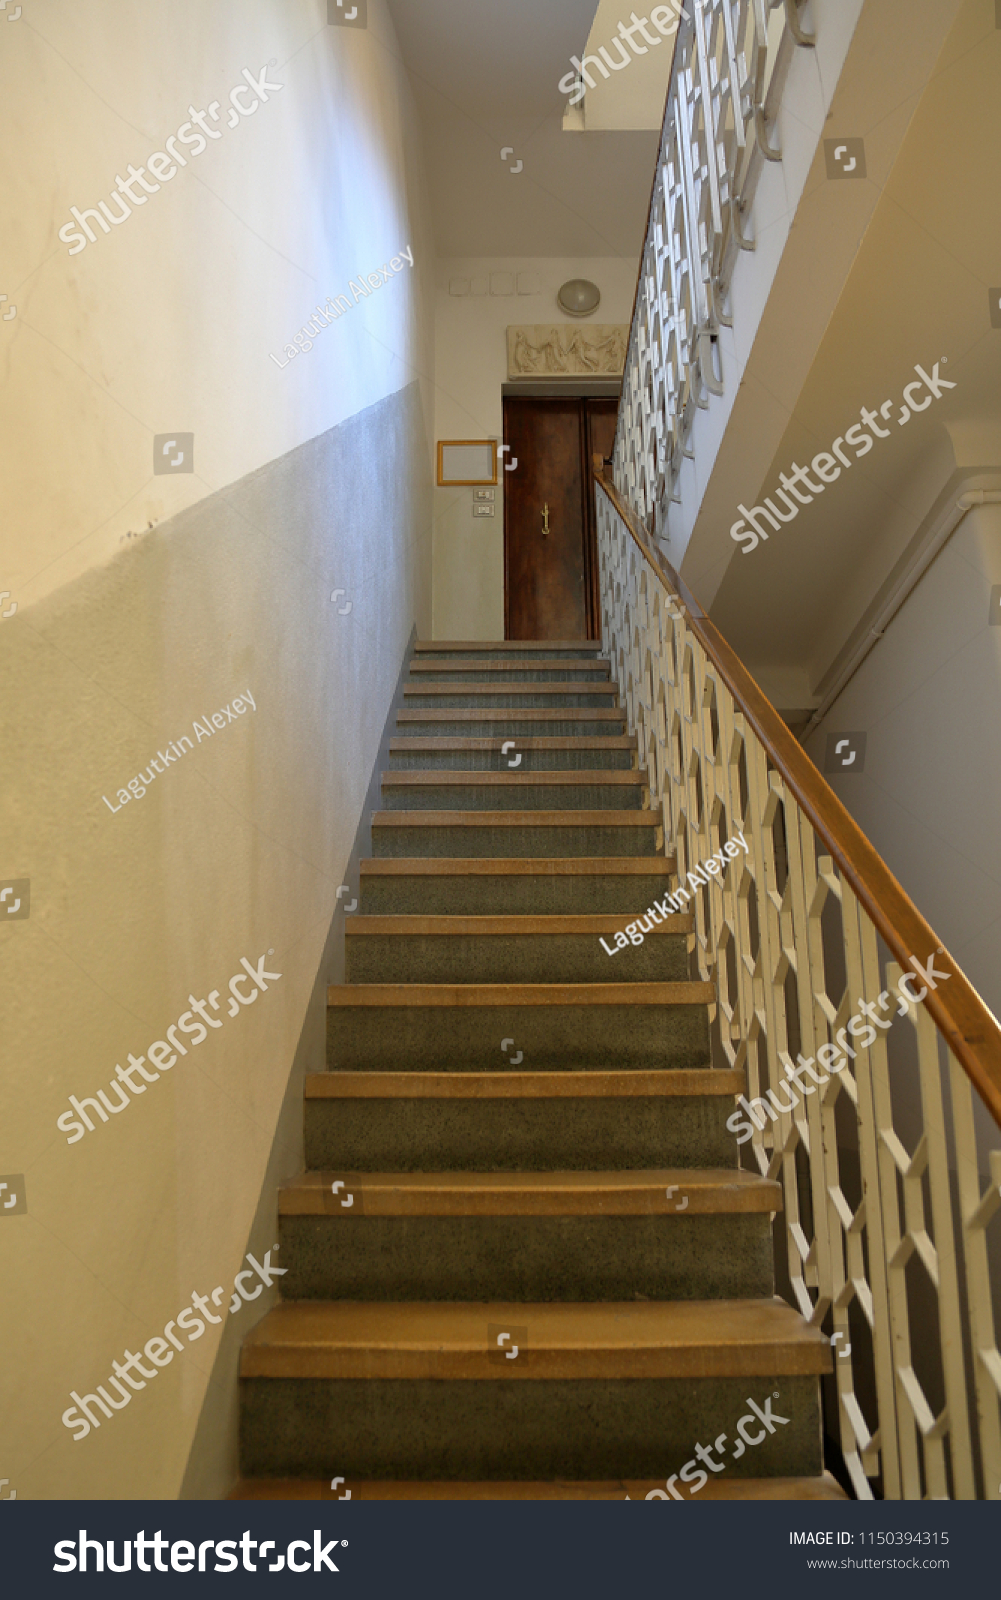 Old stone staircase with a handrail in a building without an elevator #1150394315